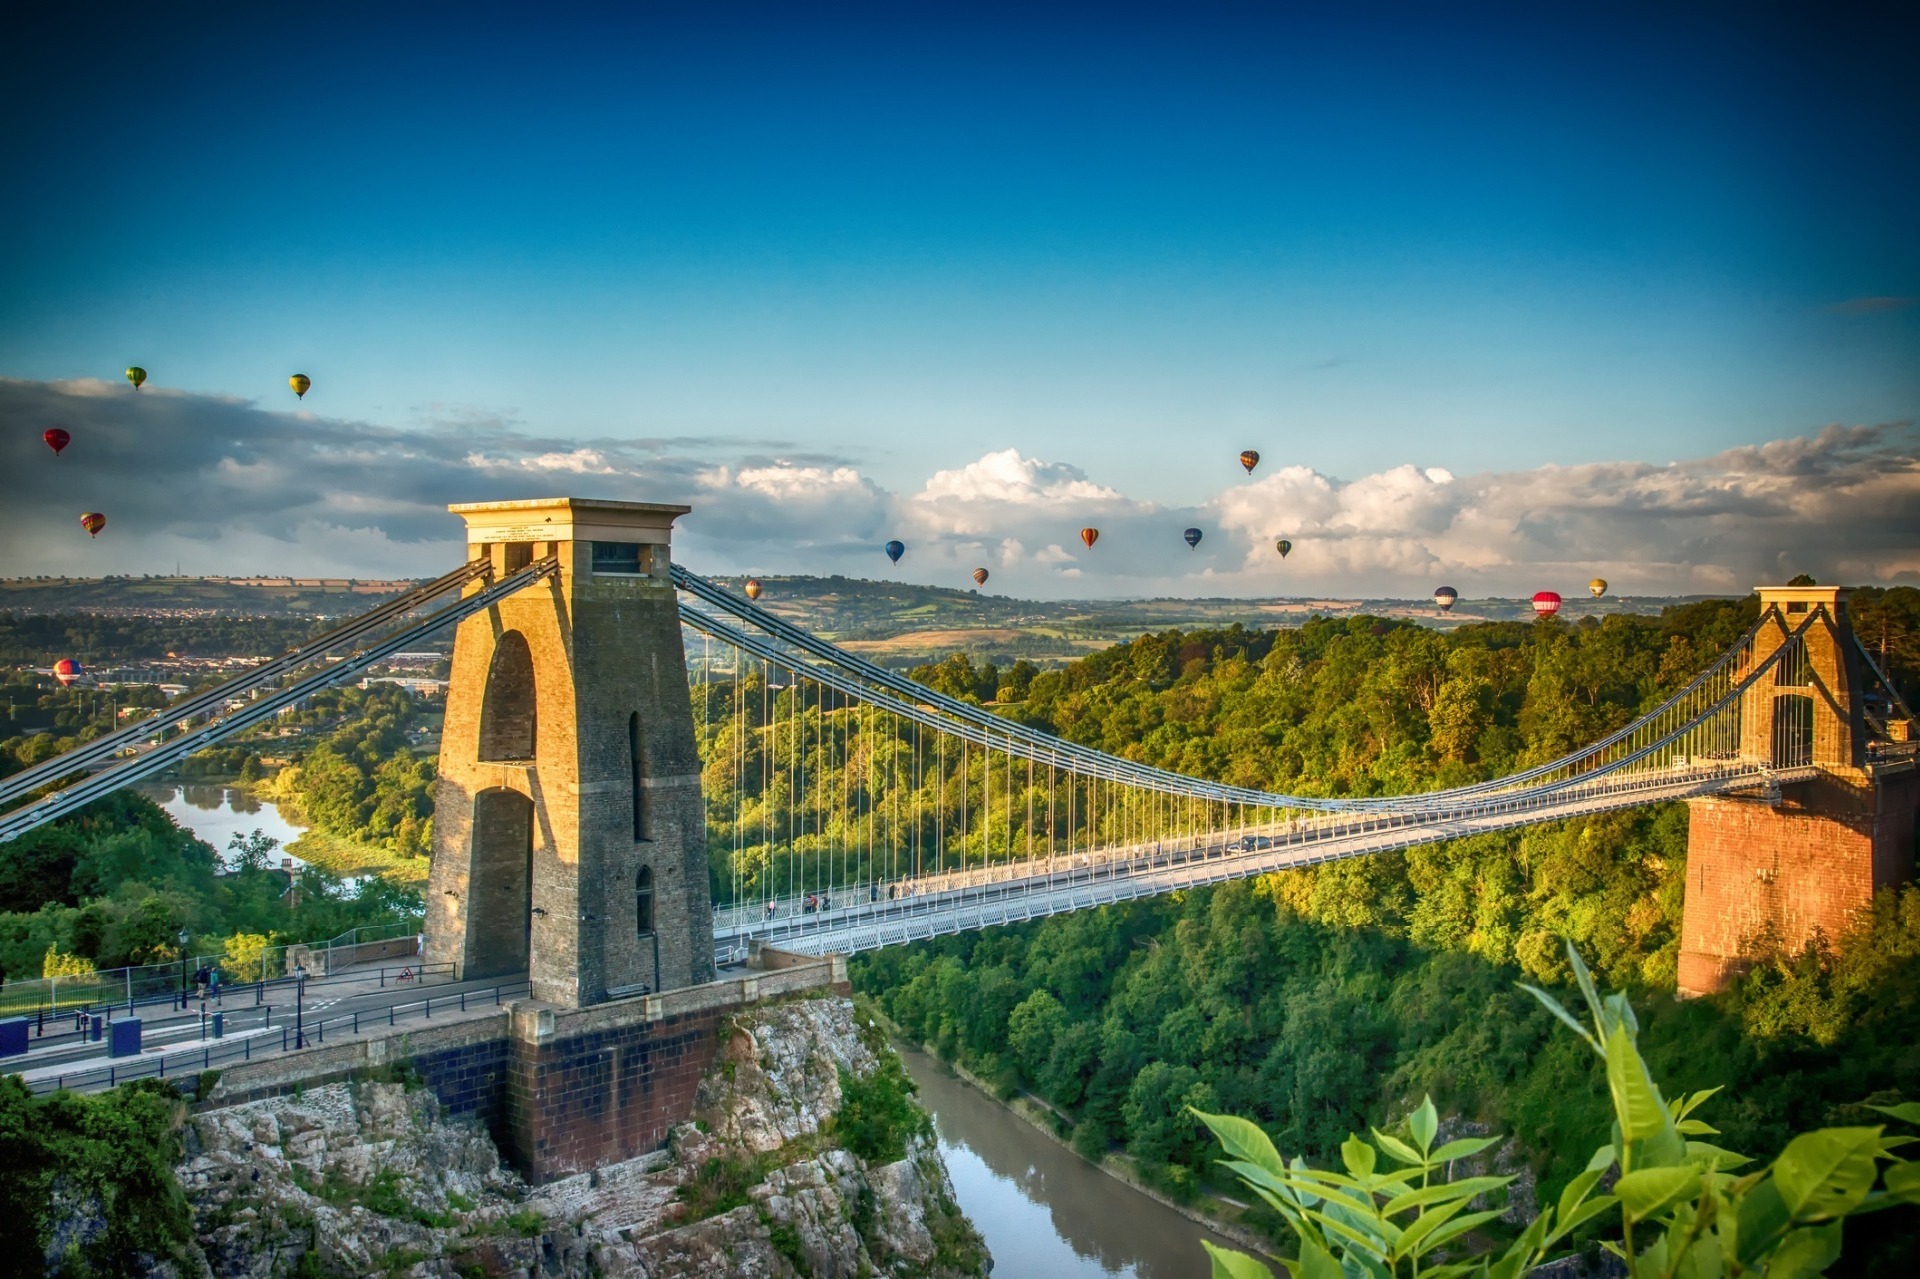 A sunny day showing Bristol's suspension bridge with hot air balloons in the sky